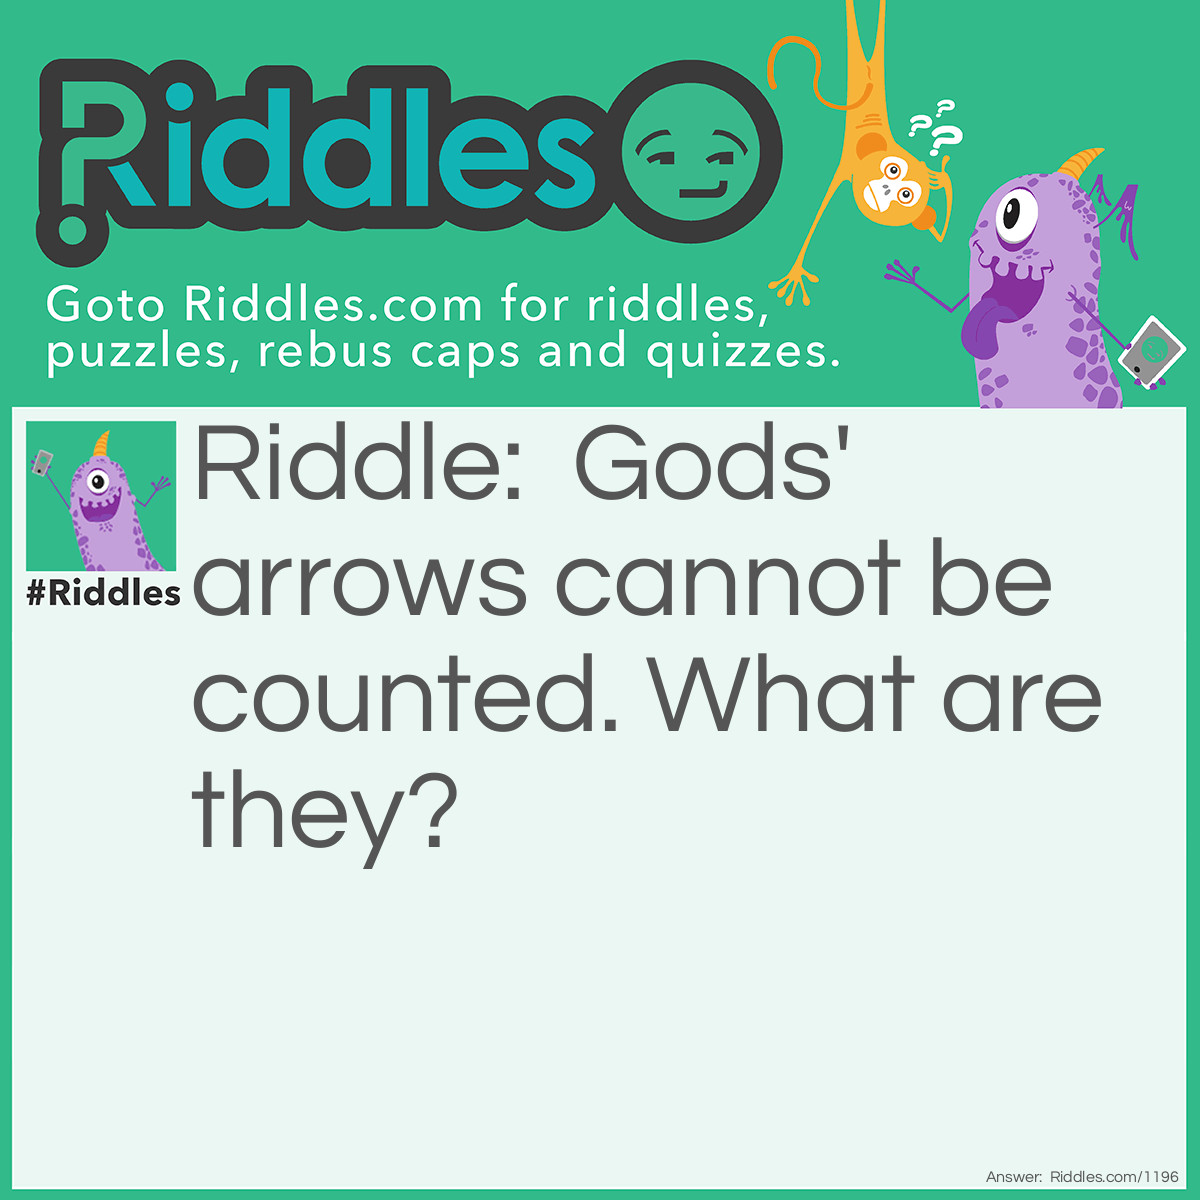 Riddle: Gods' arrows cannot be counted. What are they? Answer: Rain.